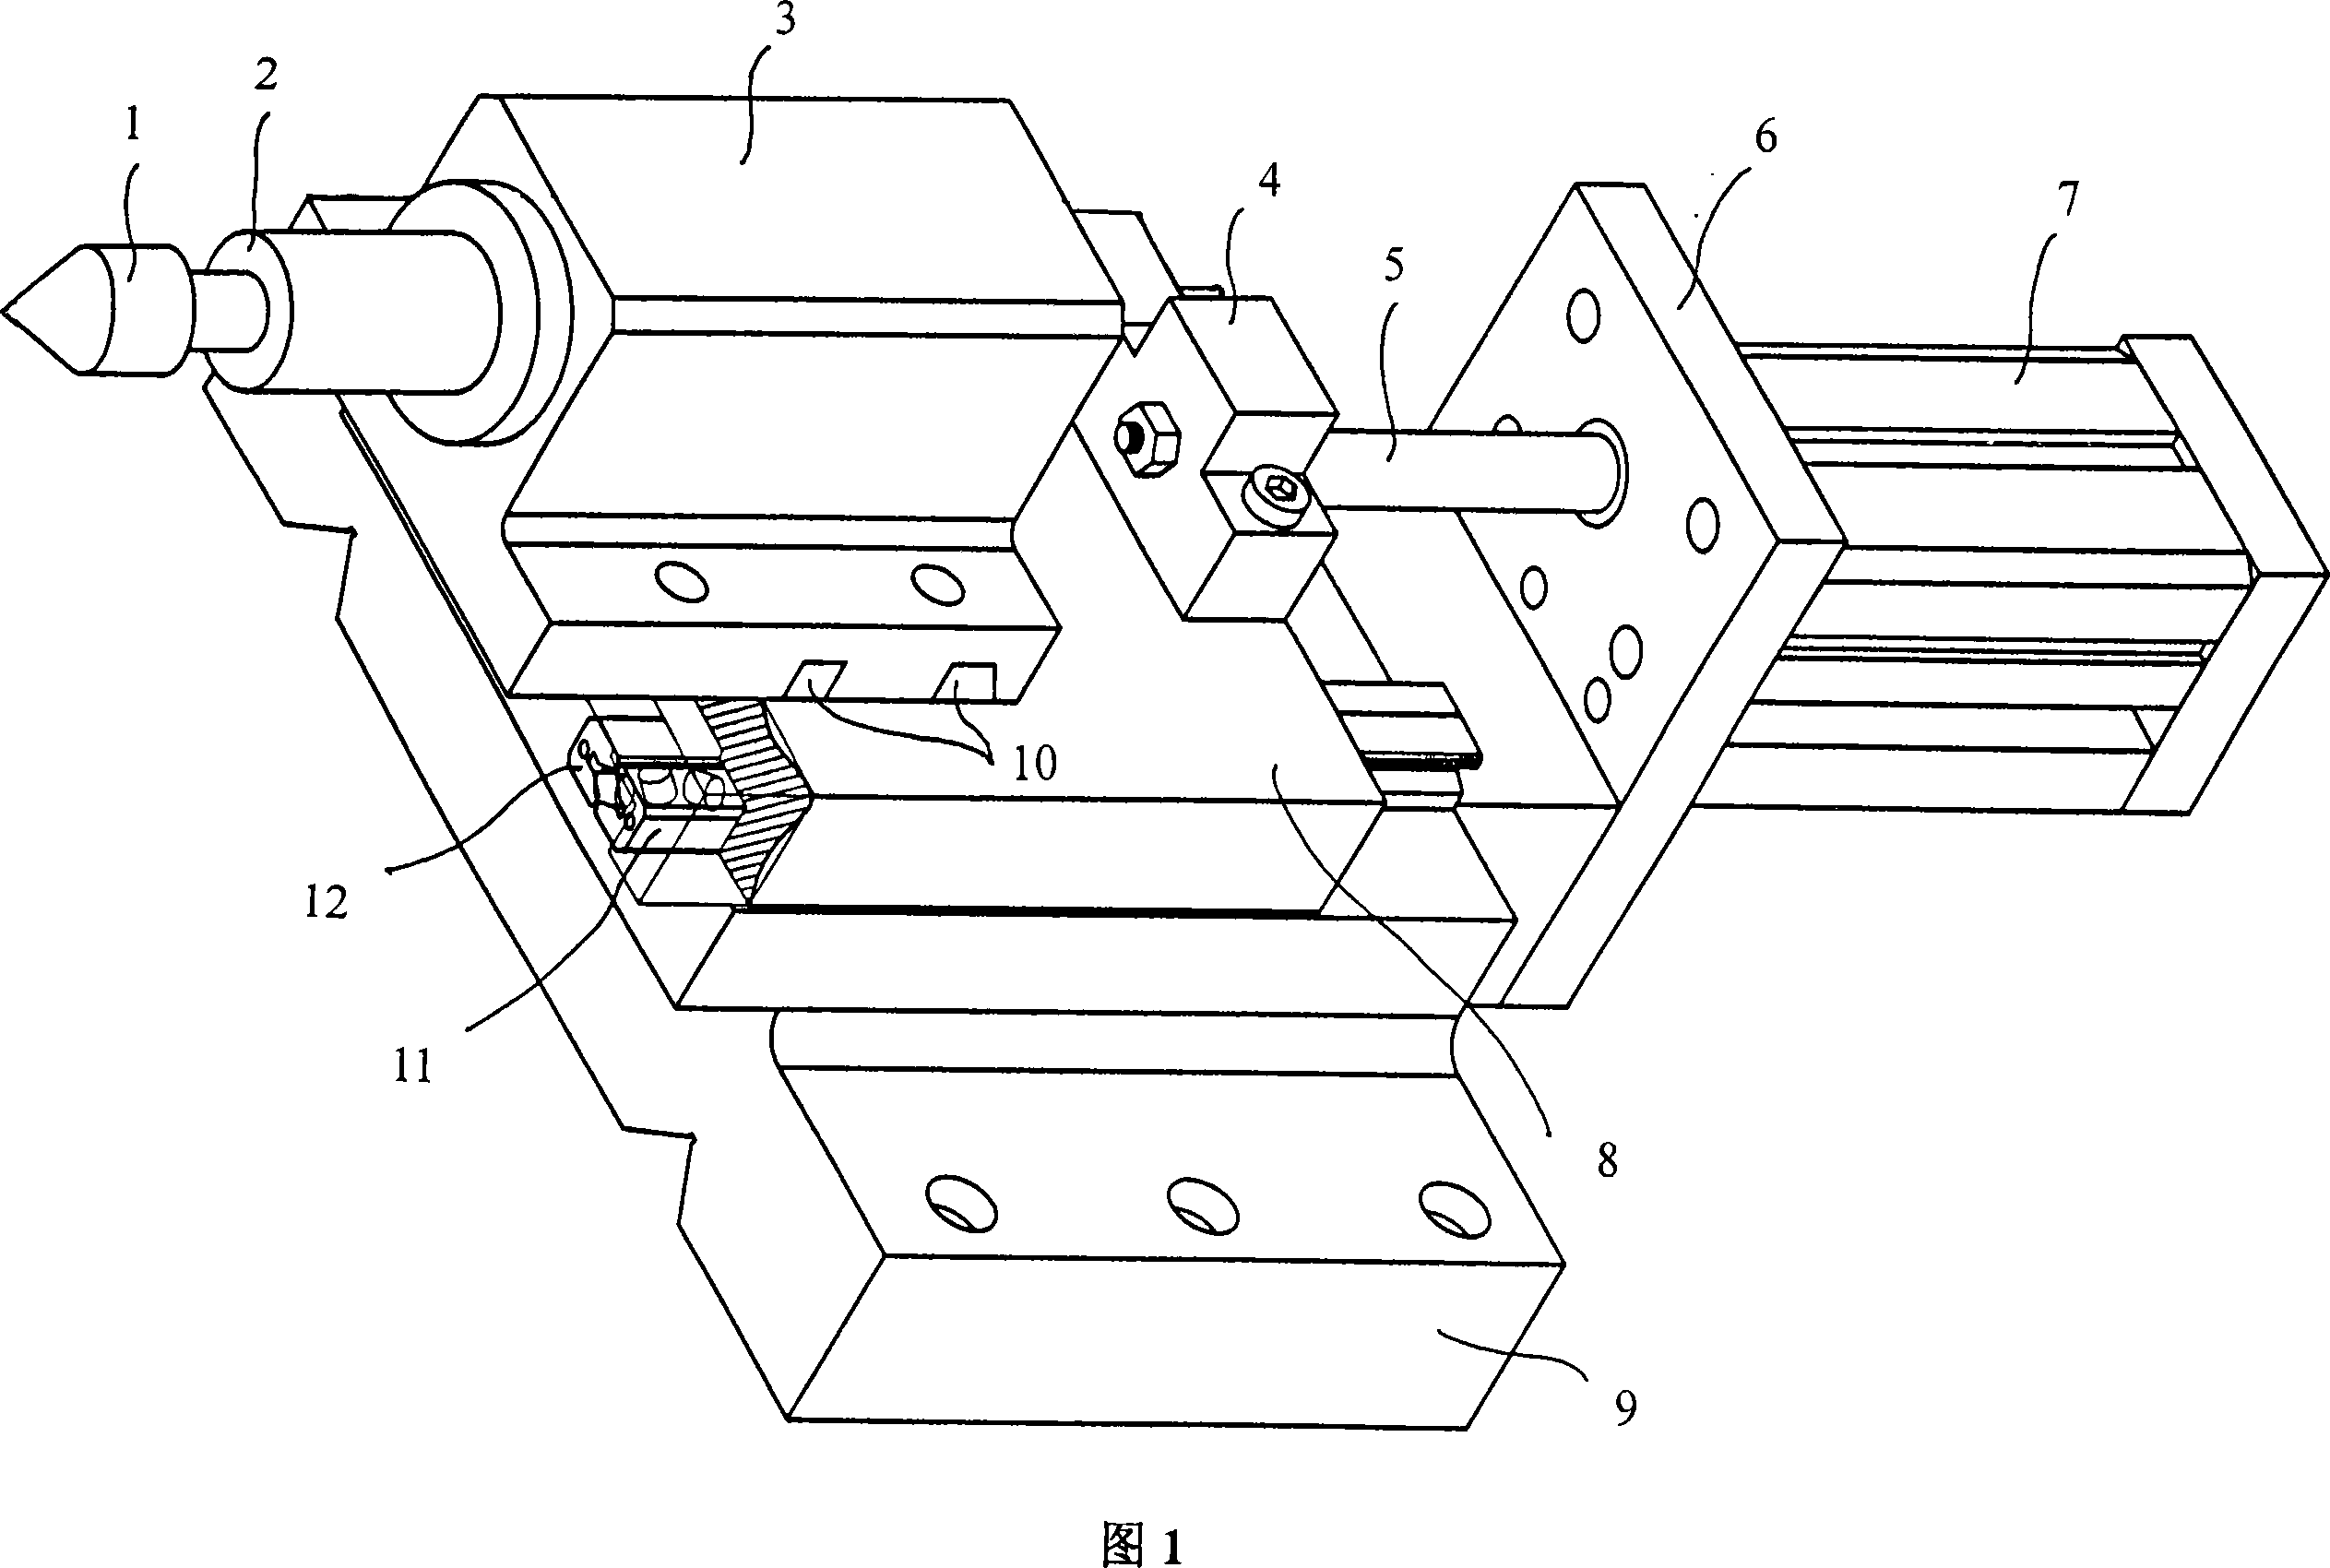 Pneumatic tailstock of numerically controlled lathe